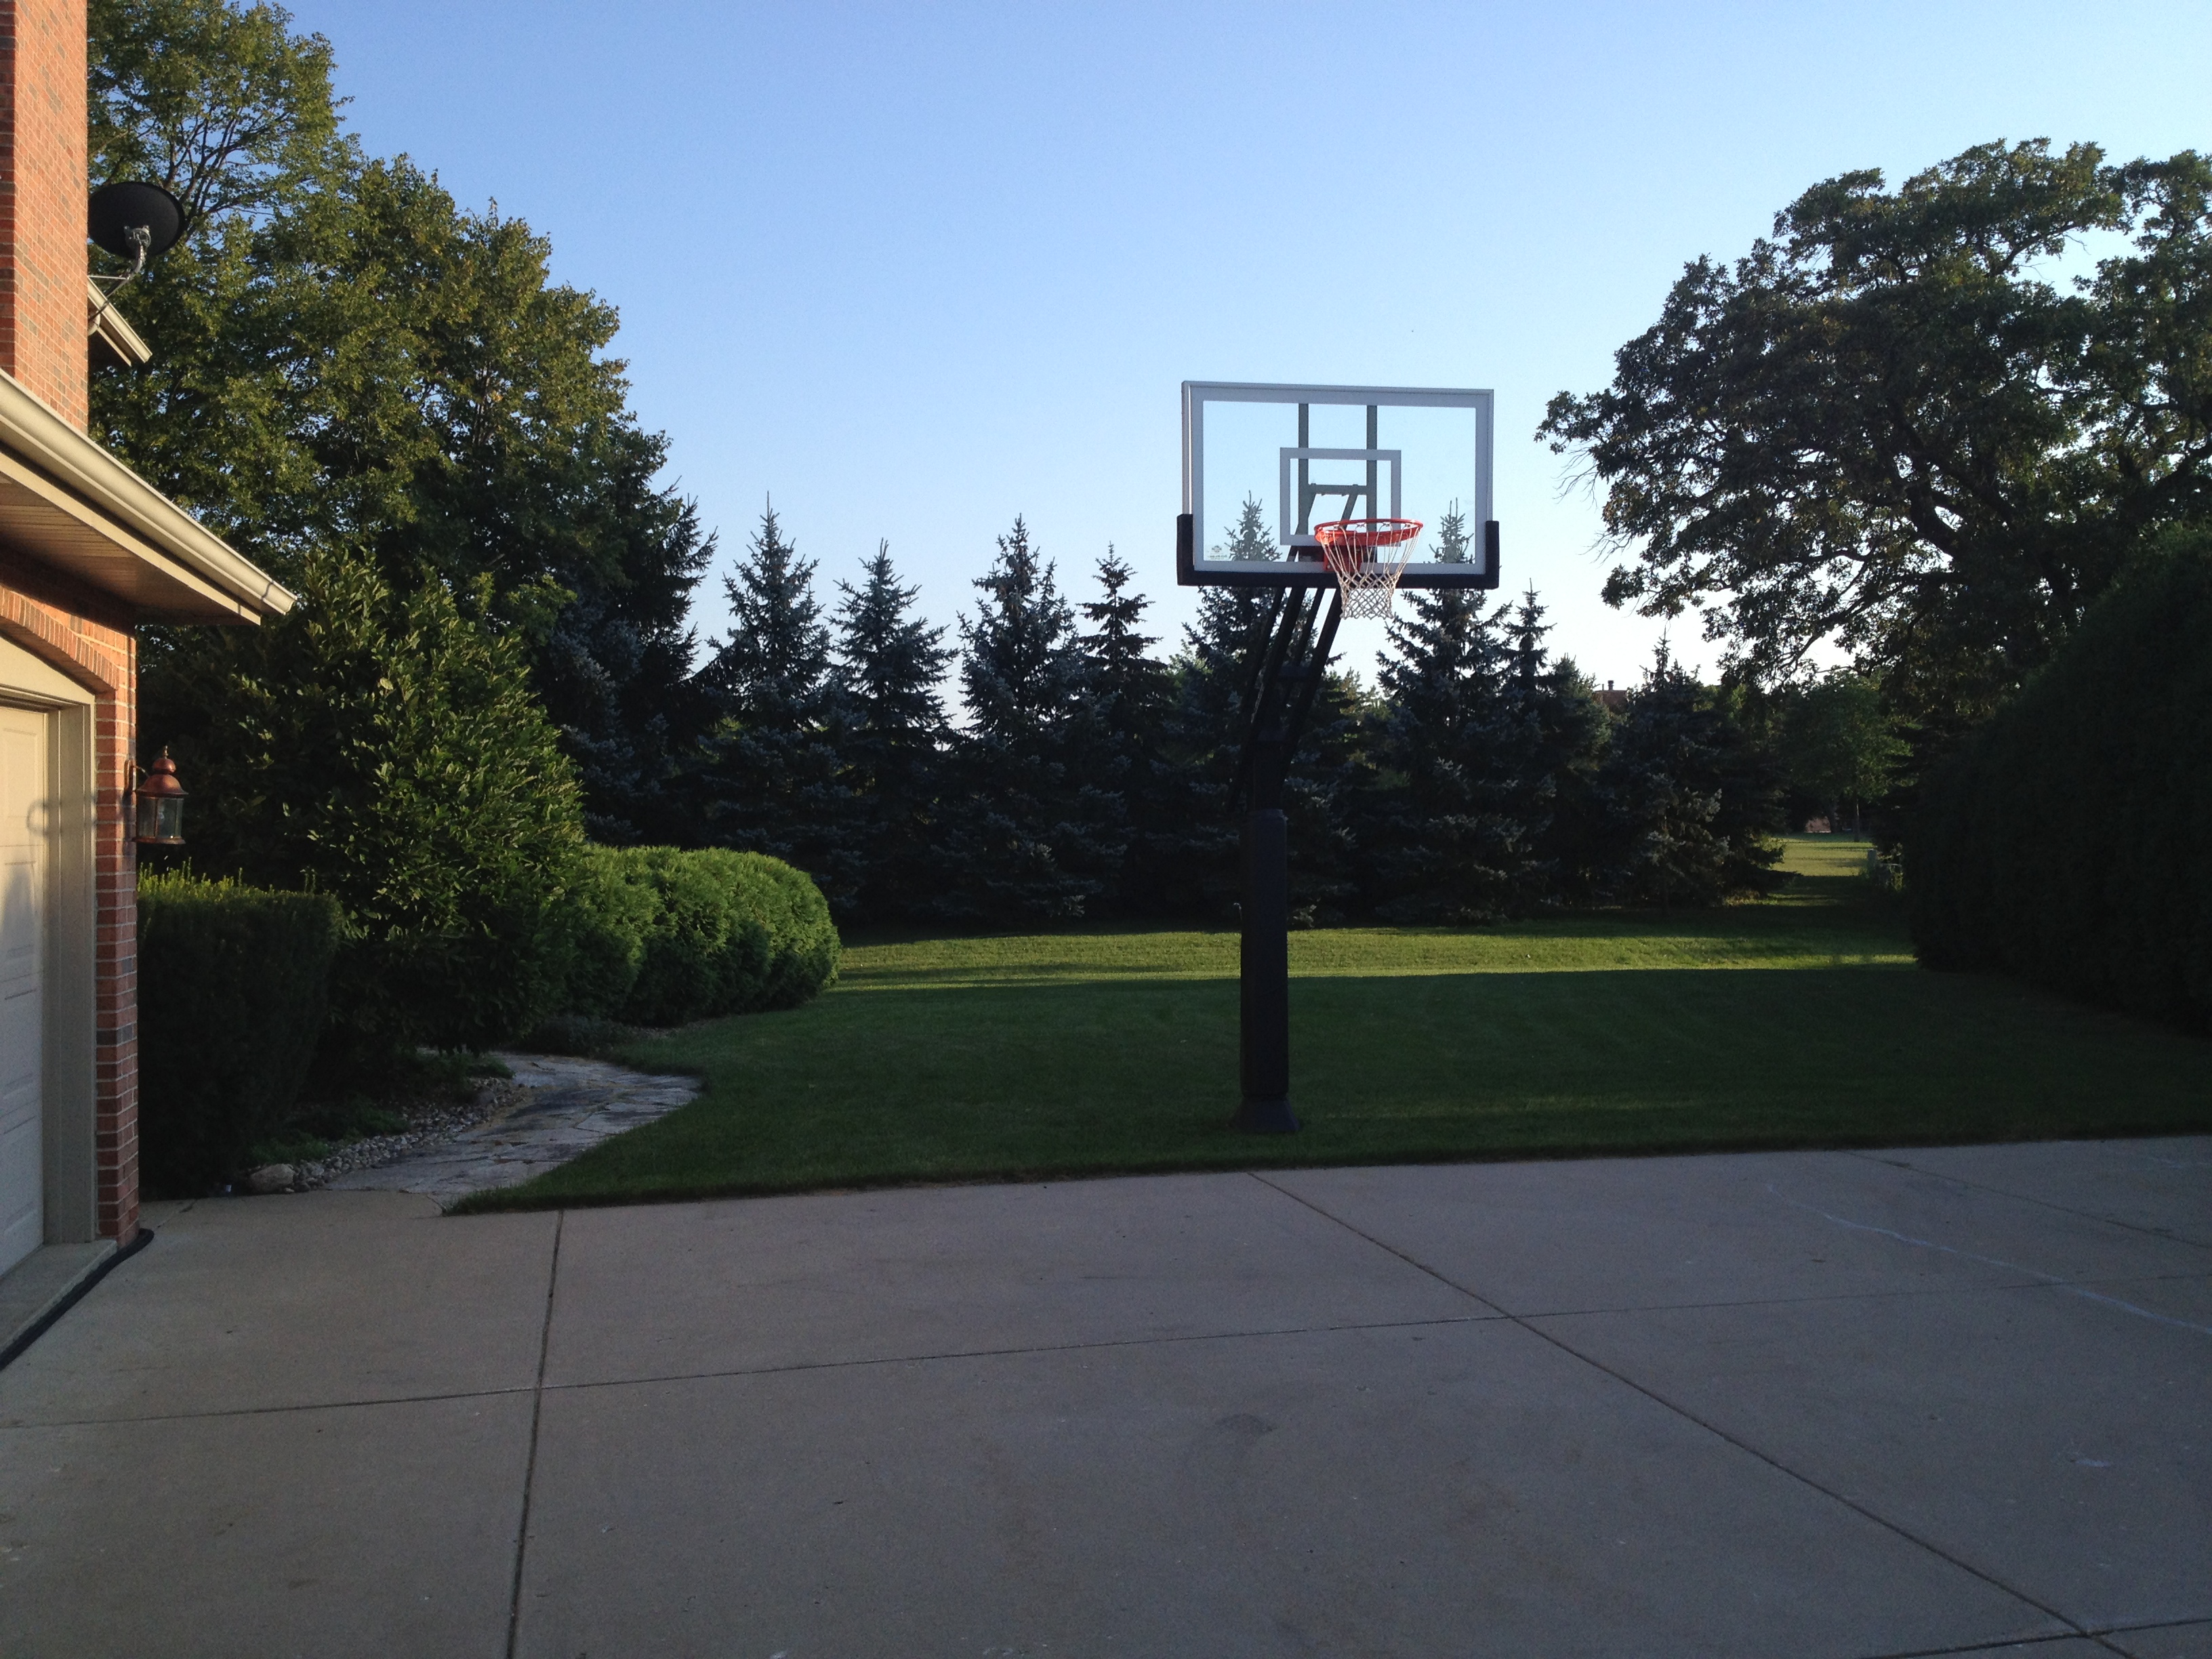 Basically surrounded by trees and a hedge, the hoop stands out.